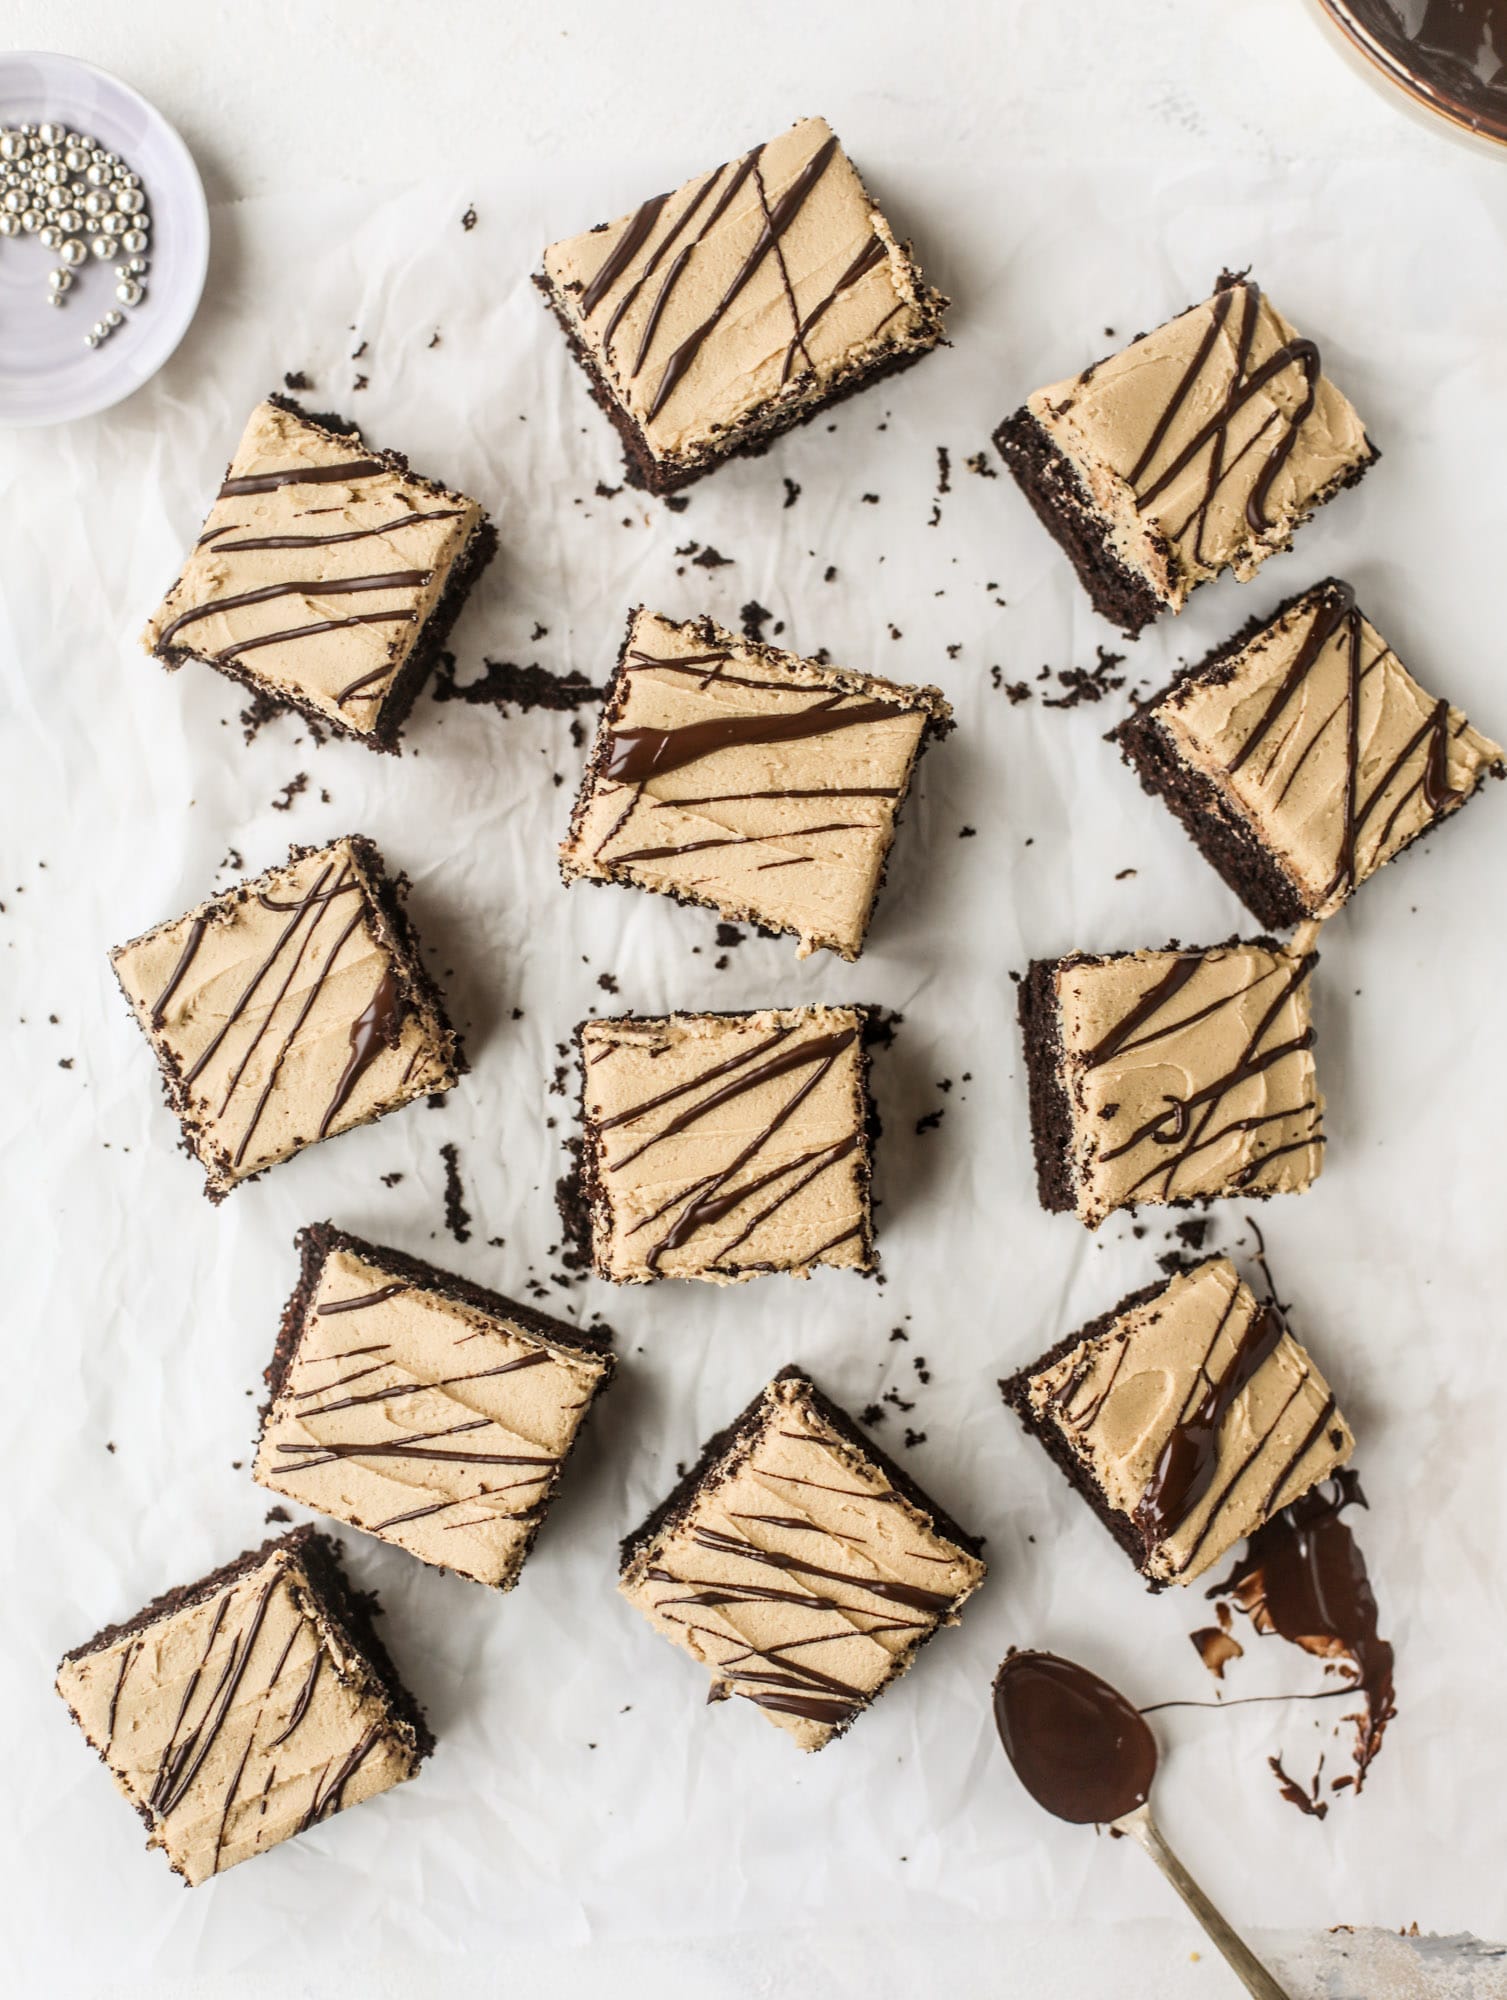 Easy chocolate peanut butter cake is the way to my heart. Moist chocolate cake, fluffy peanut butter frosting. It's the perfect dessert, anytime! I howsweeteats.com #chocolatepeanutbutter #cake